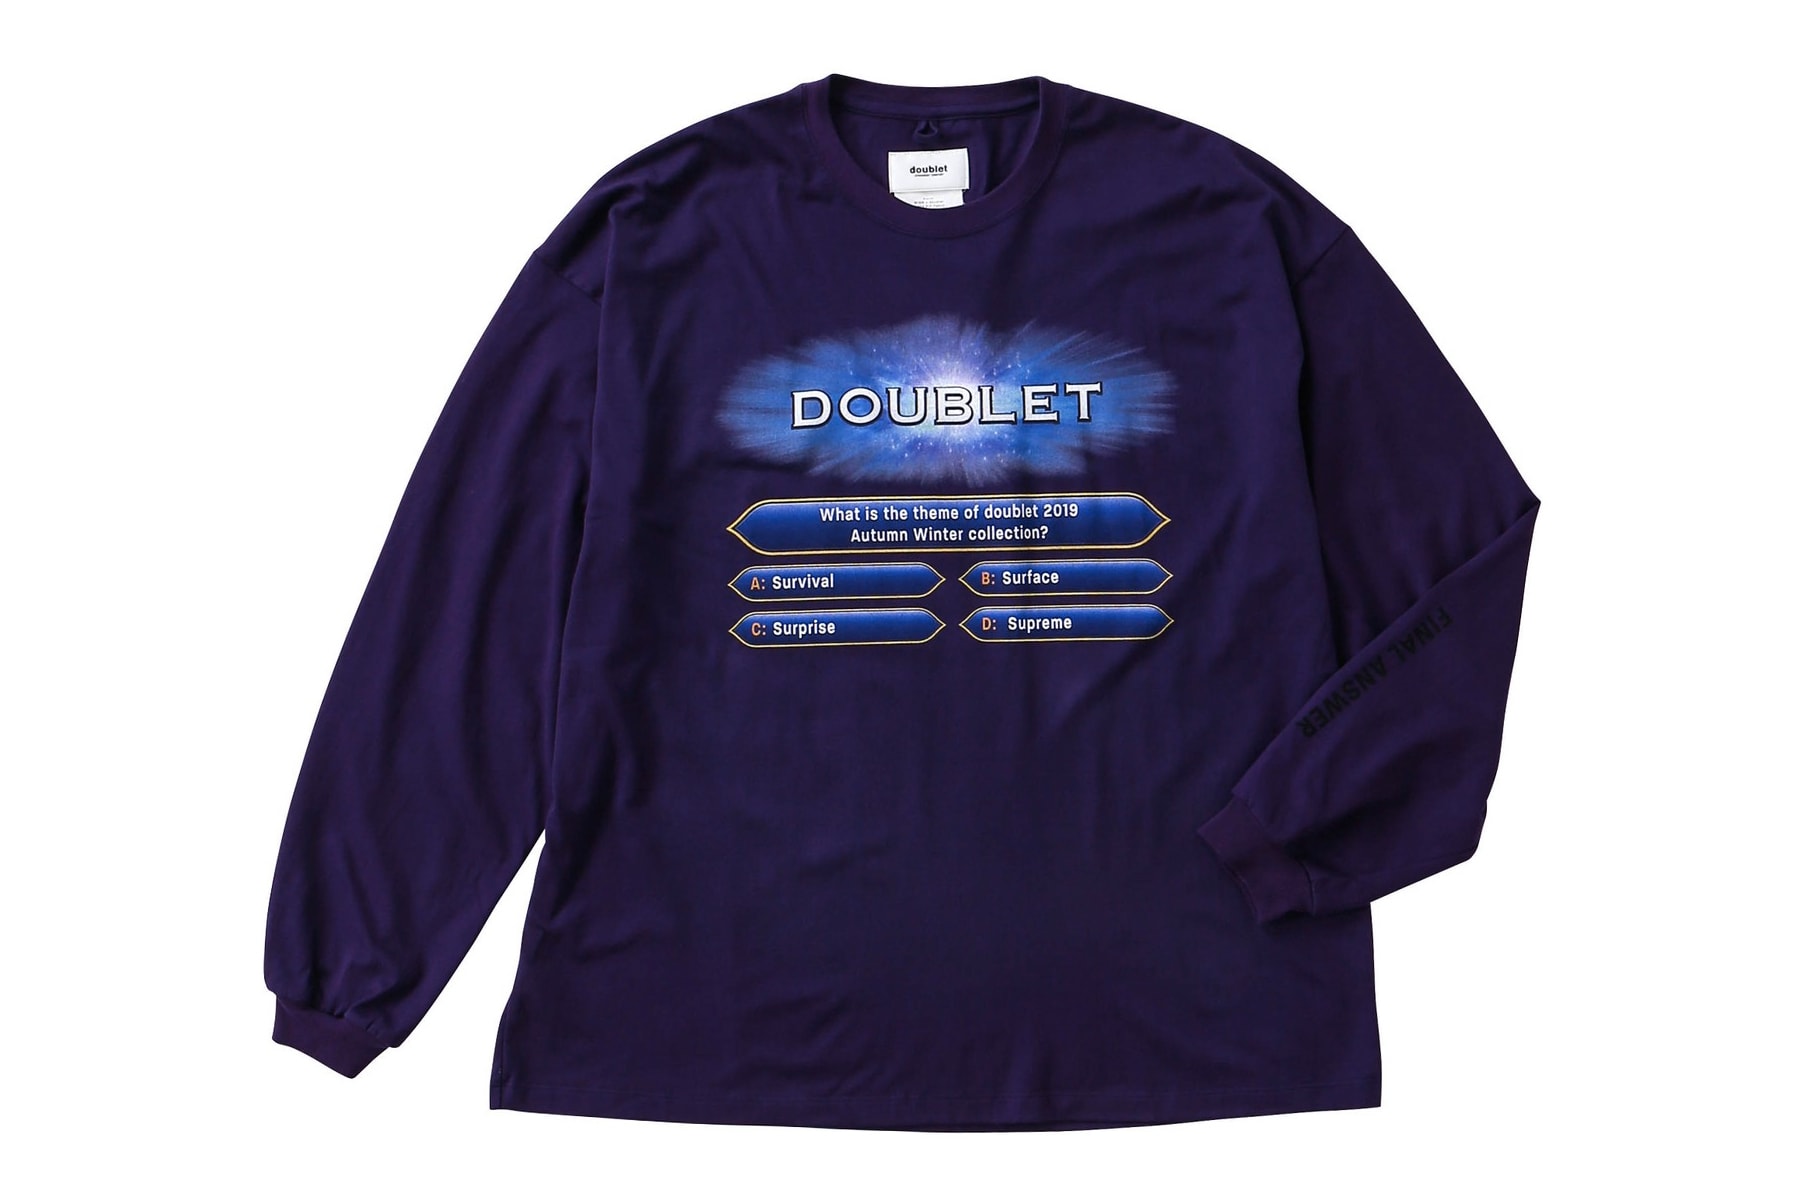 Doublet WISM Graphic Long Sleeves Collaboration who wants to be a millionaire tv show graphics lvmh streetwear japan tokyo pink teal black white purple